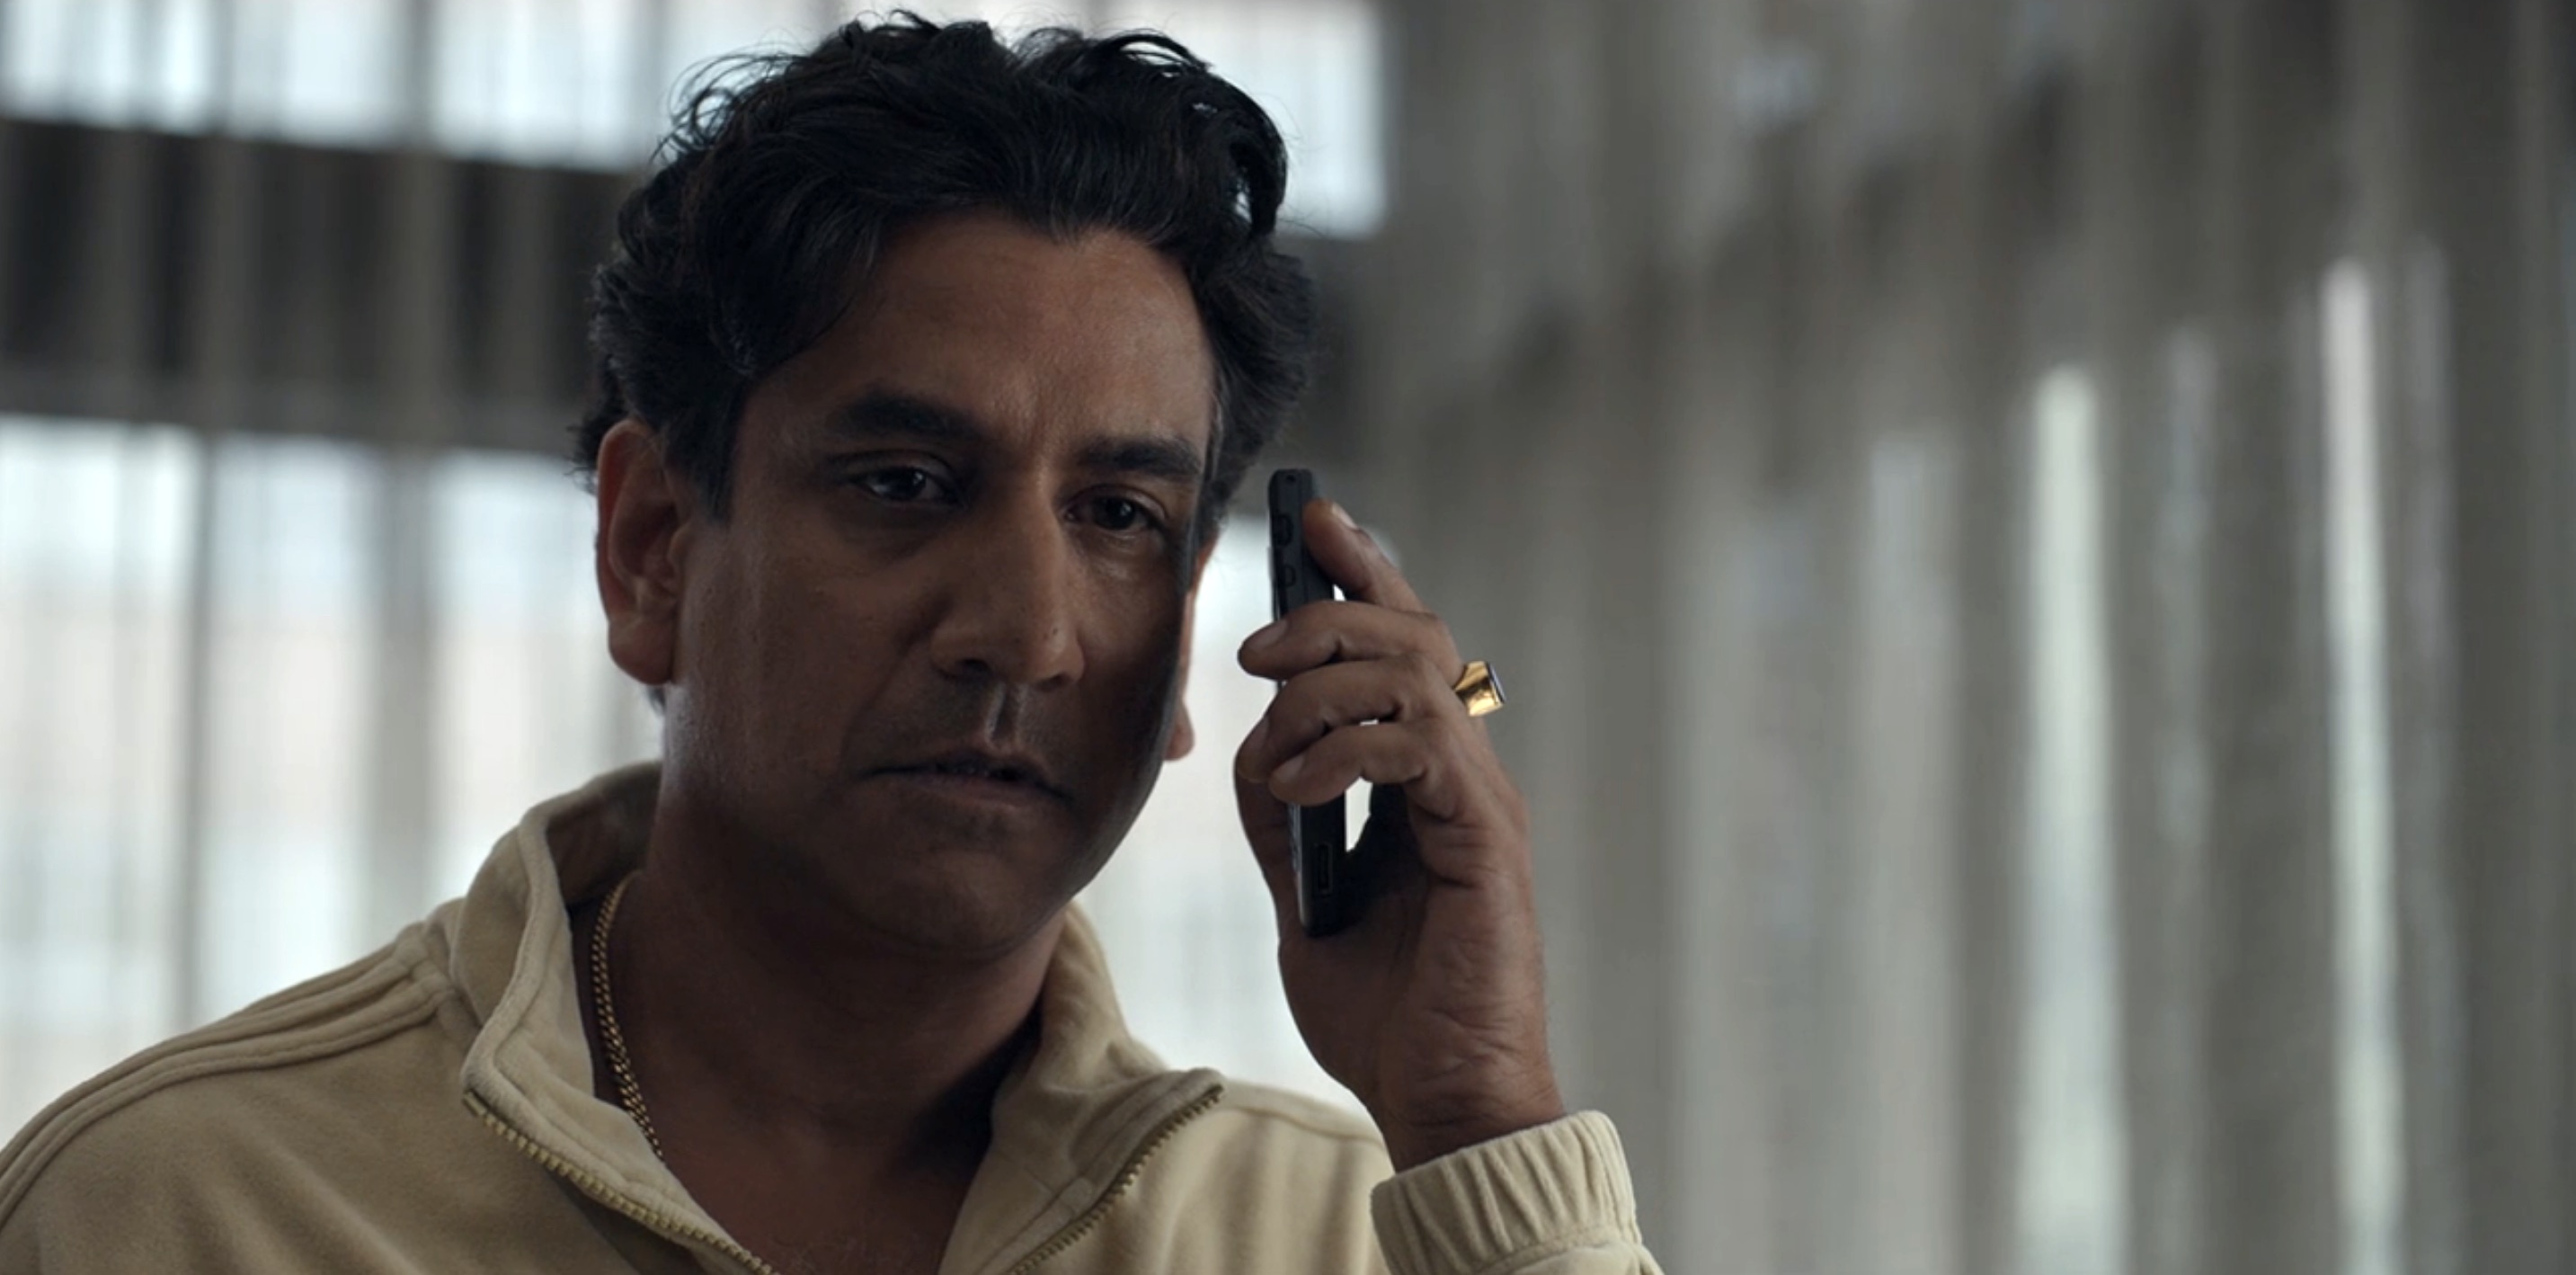 The Dropout Cast on Hulu - Naveen Andrews as Sunny Balwani